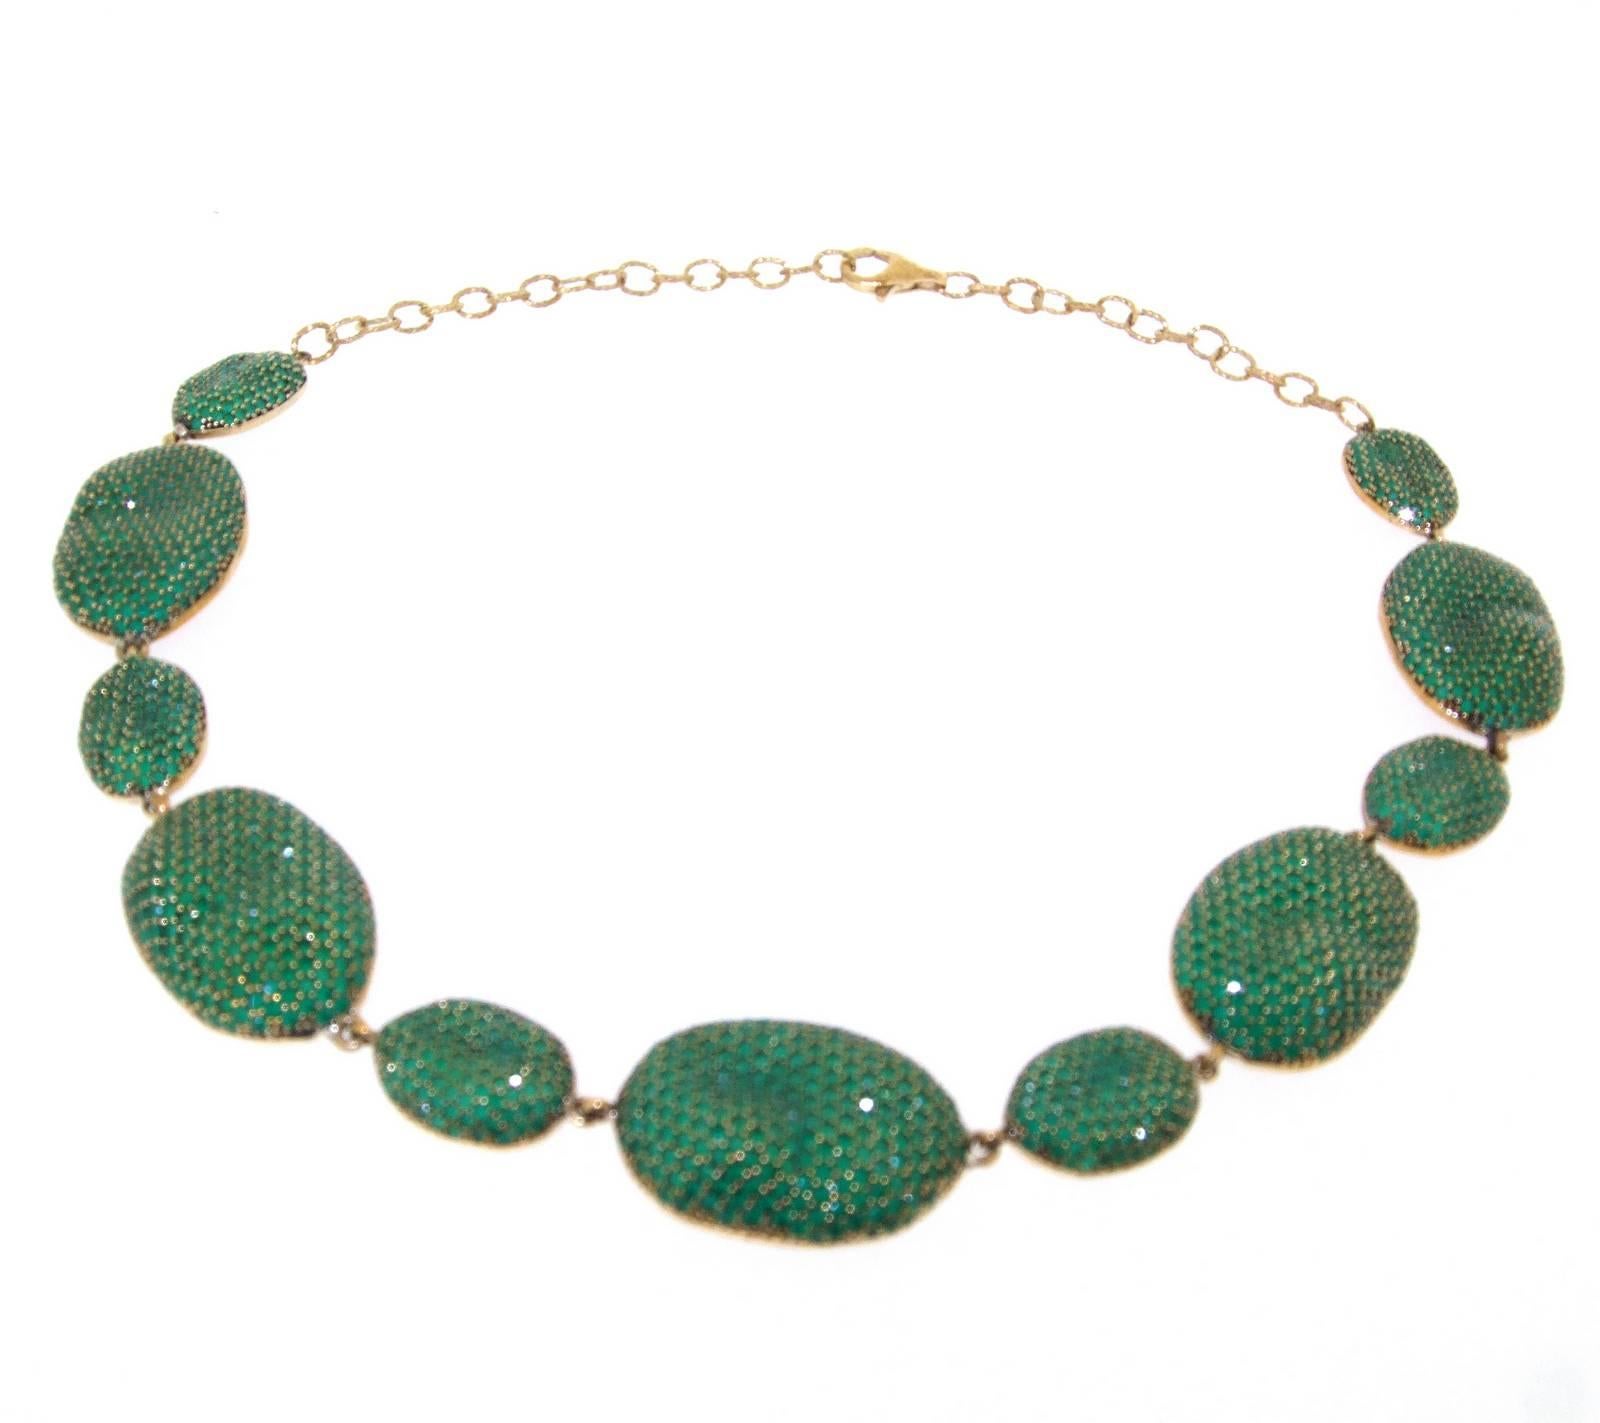 A stunning necklace by JCM London. Each misty emerald effect cubic zirconia encrusted pebble has a natural undulating uneven formation to give it the feel of the shape of a natural pebble. 

The smaller ovals measure 2cm long by 1.3cm wide.  The